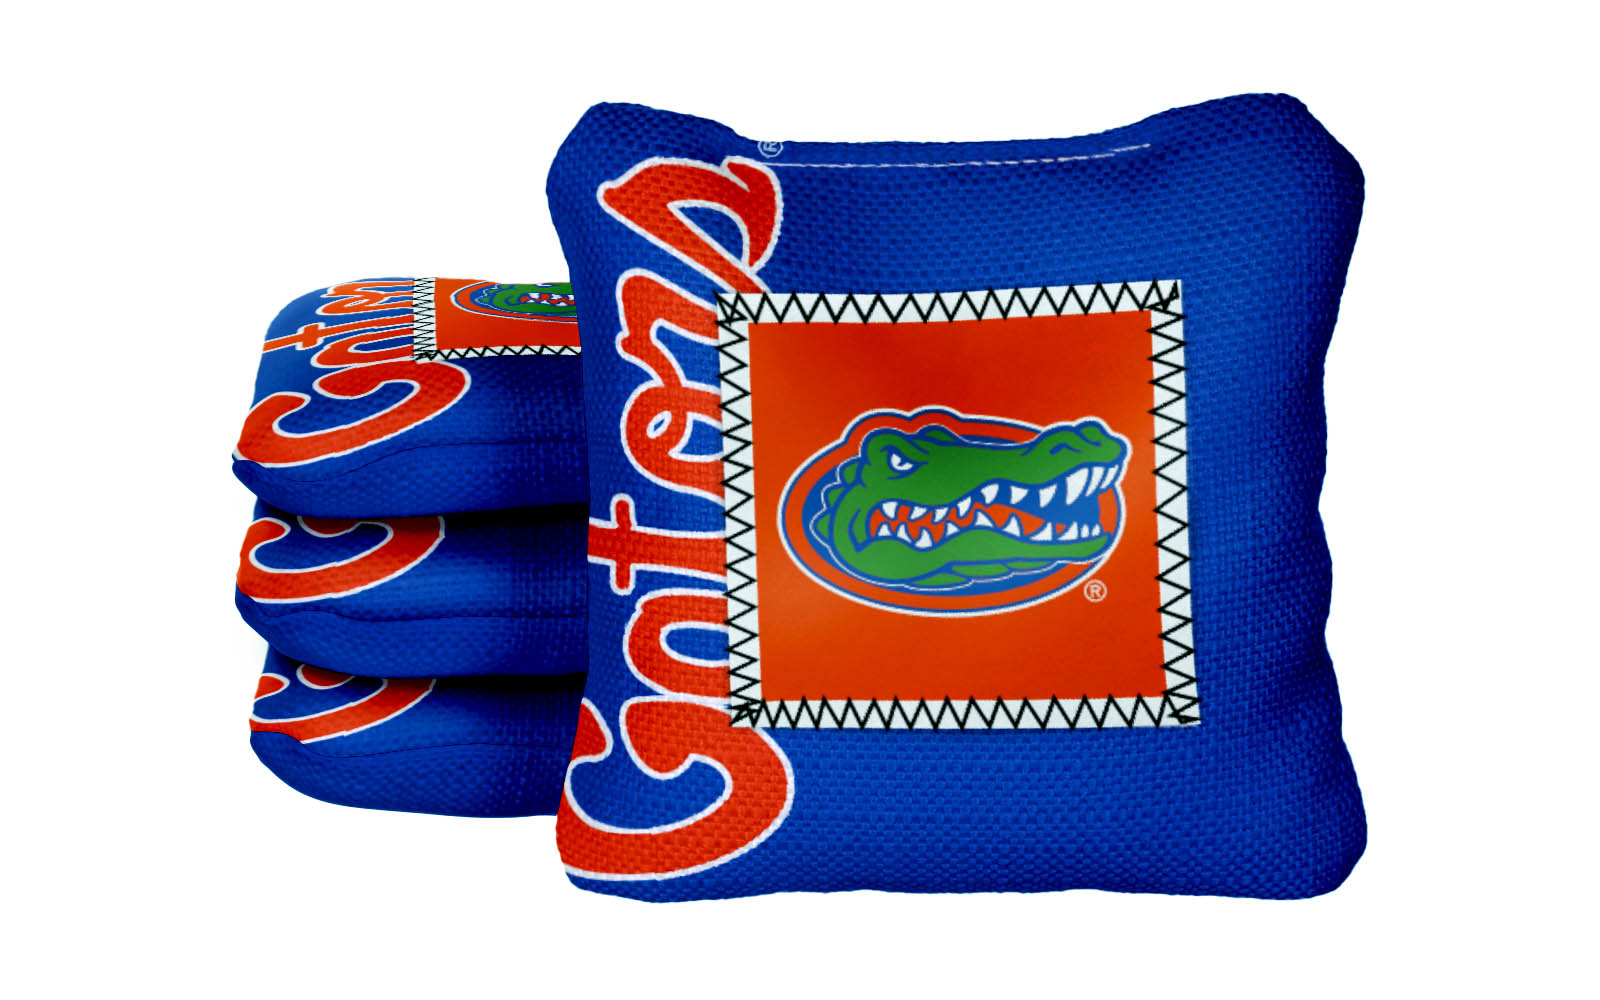 Officially Licensed Collegiate Cornhole Bags - Gamechangers - Set of 4 - University of Florida